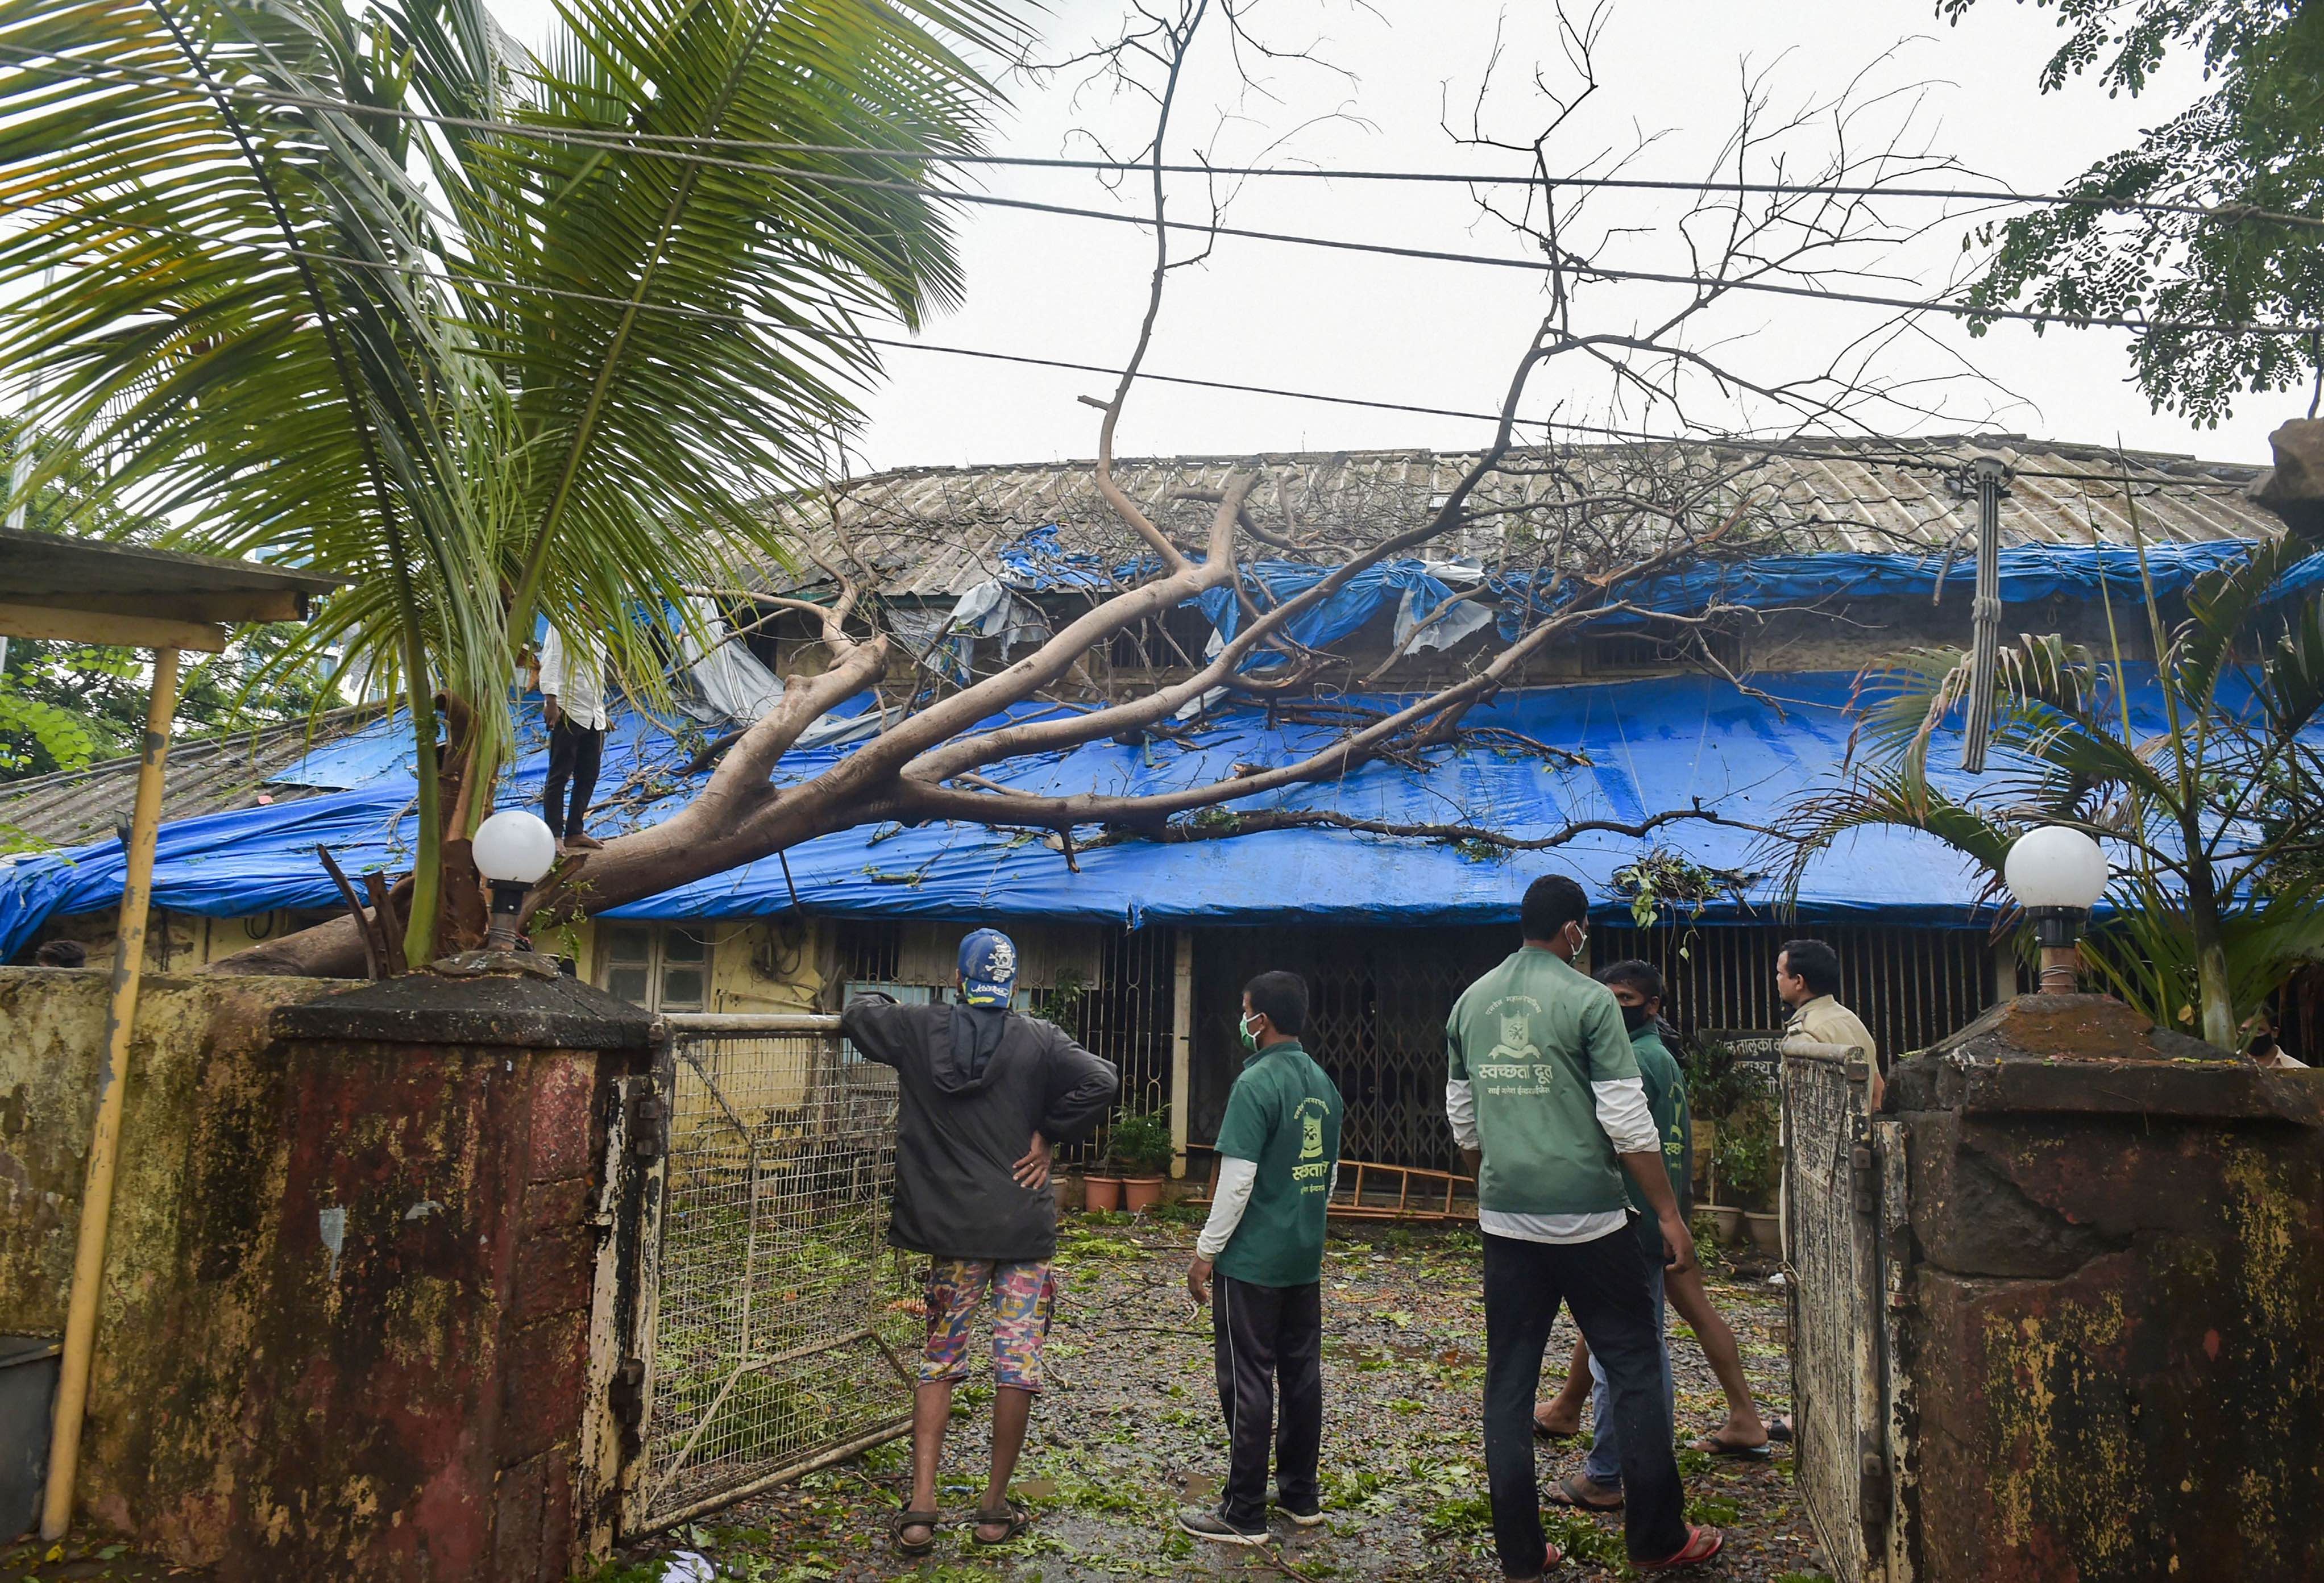 Workers prepare to chop an uprooted tree to clear the premises of a government building in the aftermath of Cyclone Nisarga. Credit: PTI Photo